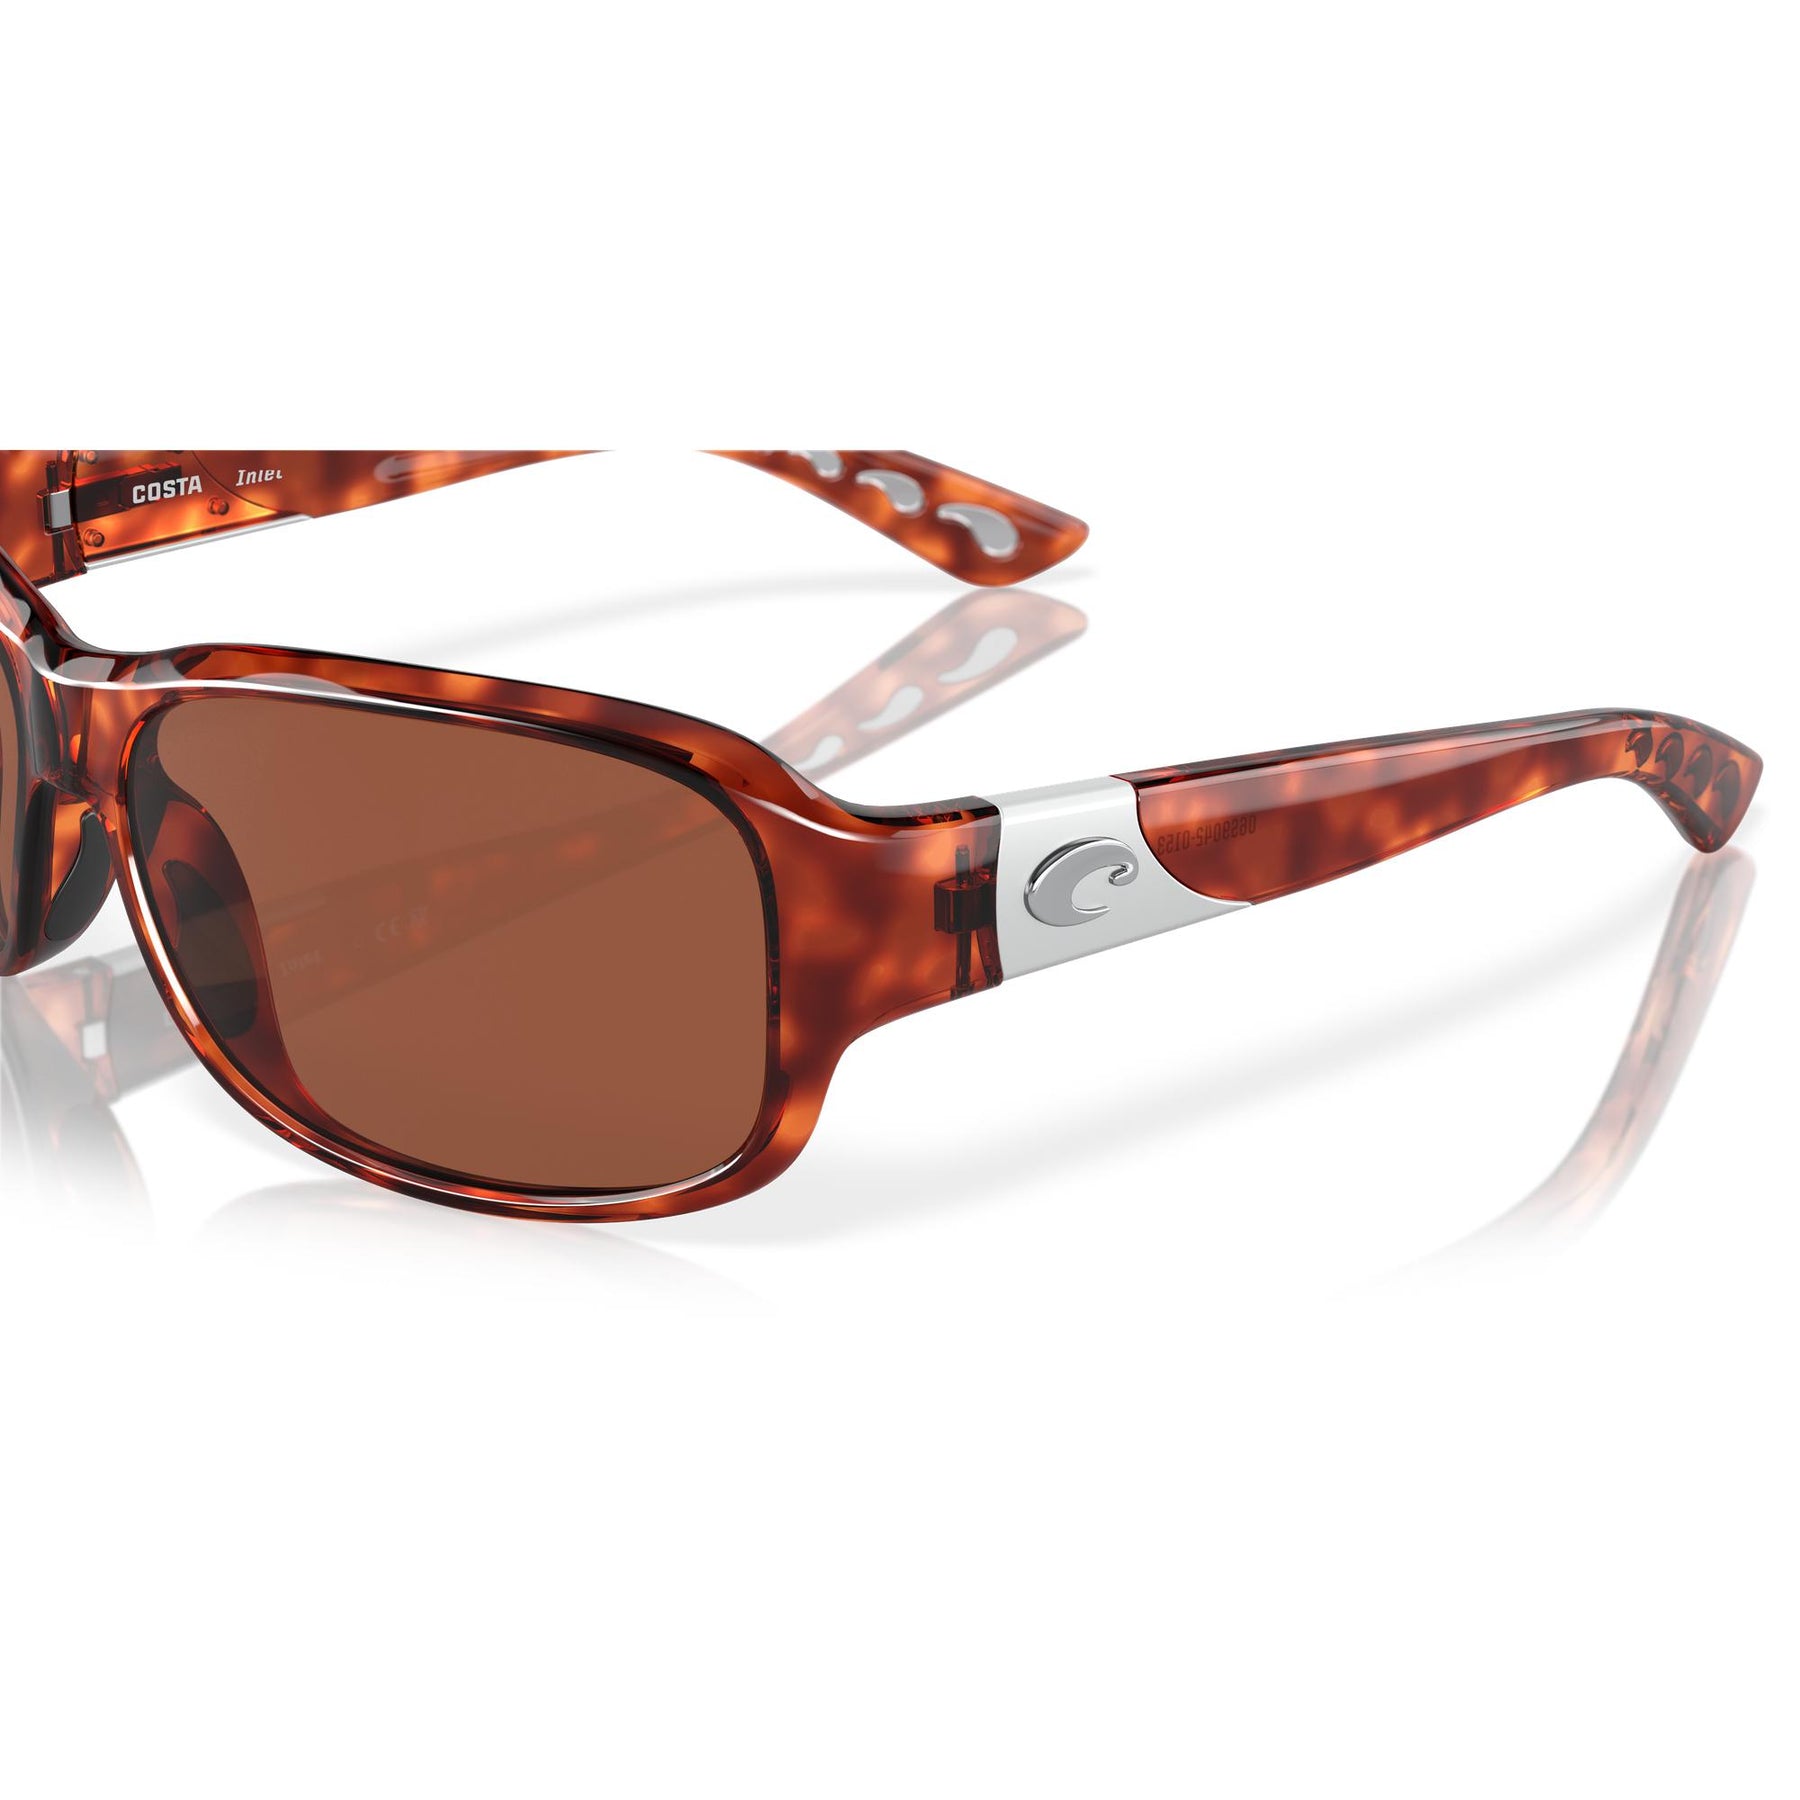 View of Sunglasses Costa Inlet Tortoise Frame Copper Silver Mirror 580G available at EZOKO Pike and Musky Shop